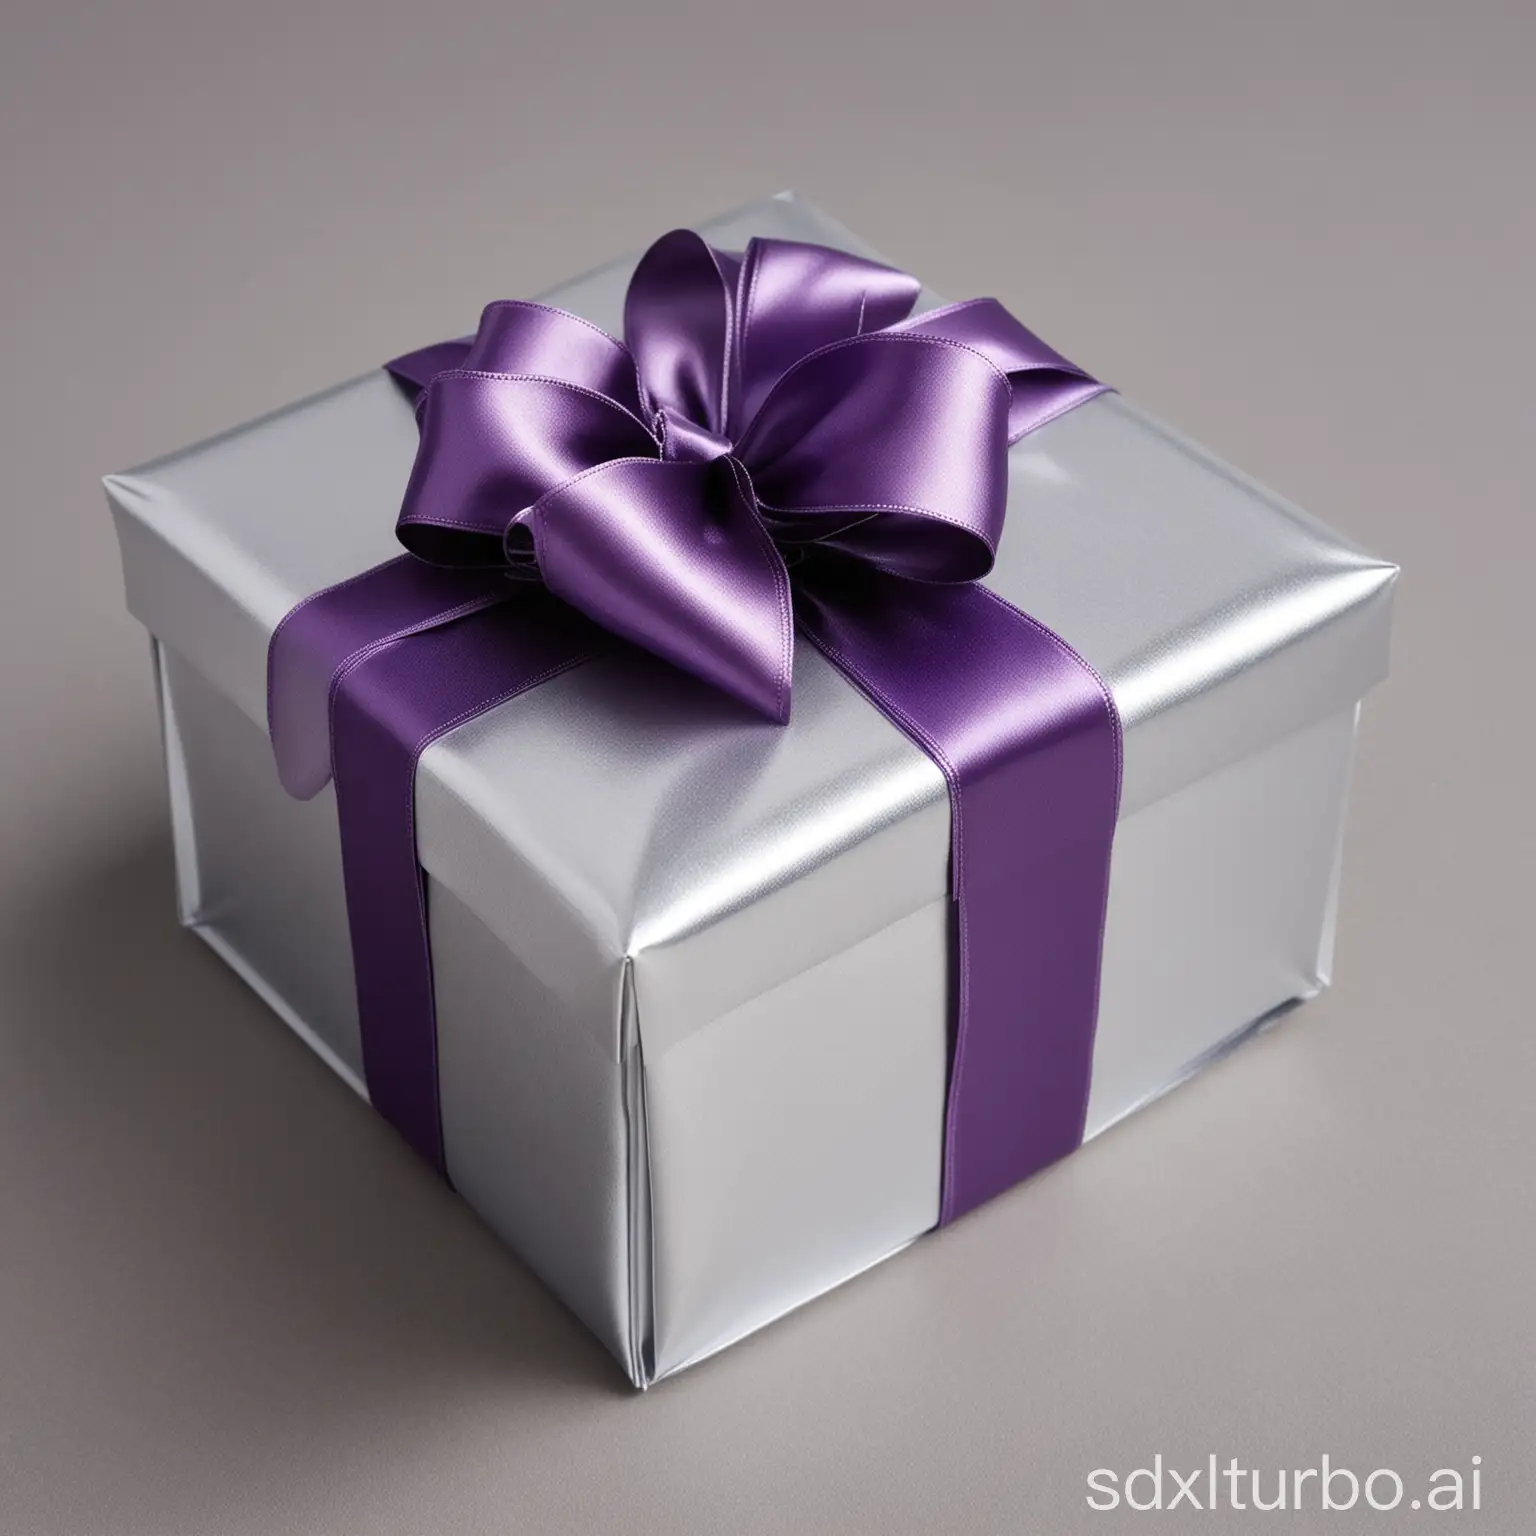 Feature a sleek silver present against a neutral grey background with a regal purple ribbon, focusing solely on the present and preventing small objects from lying anywhere near it